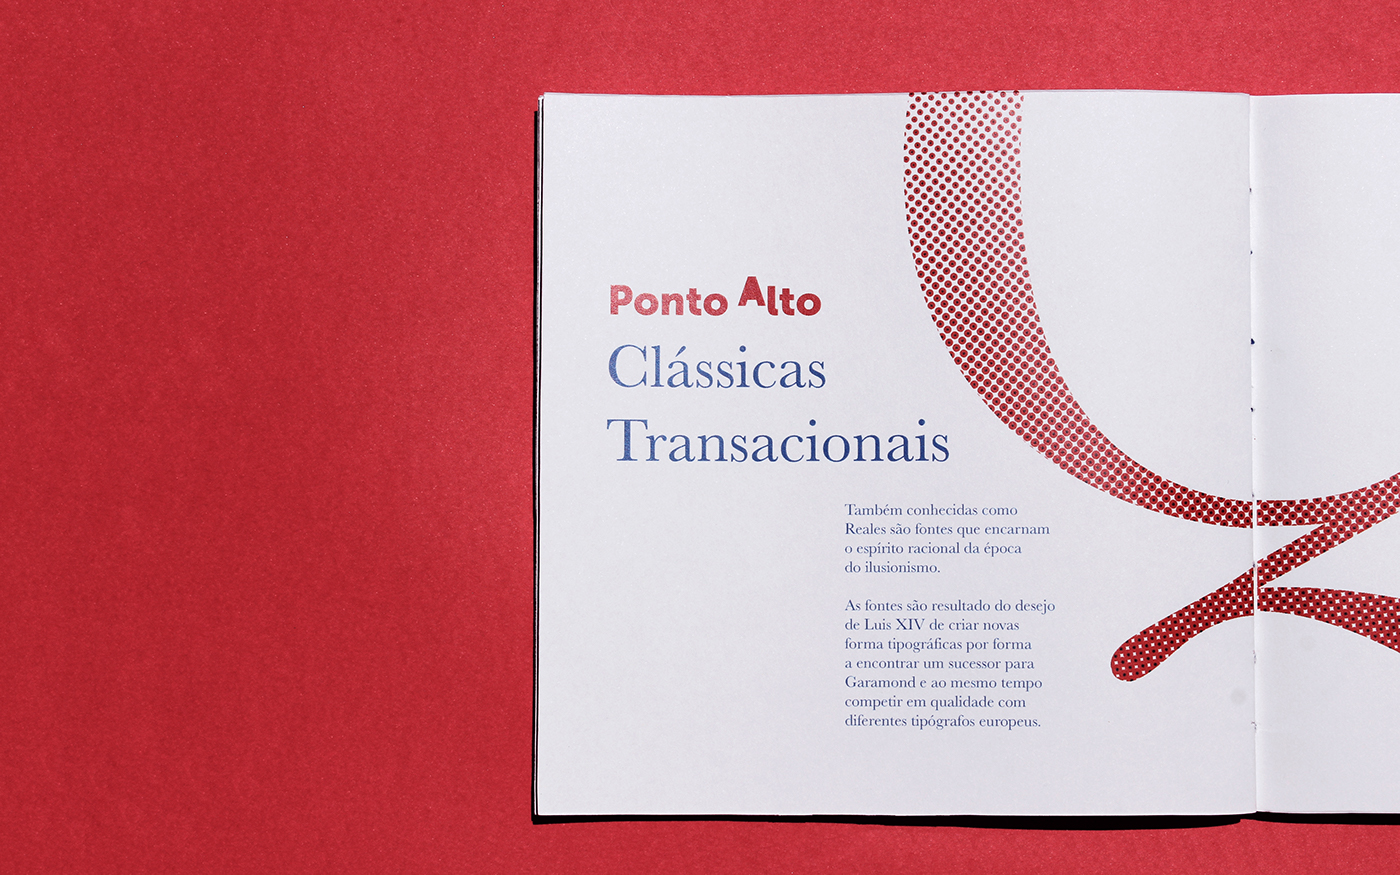 typography   tipografia type fonts Catalogue dots point halftone red blue